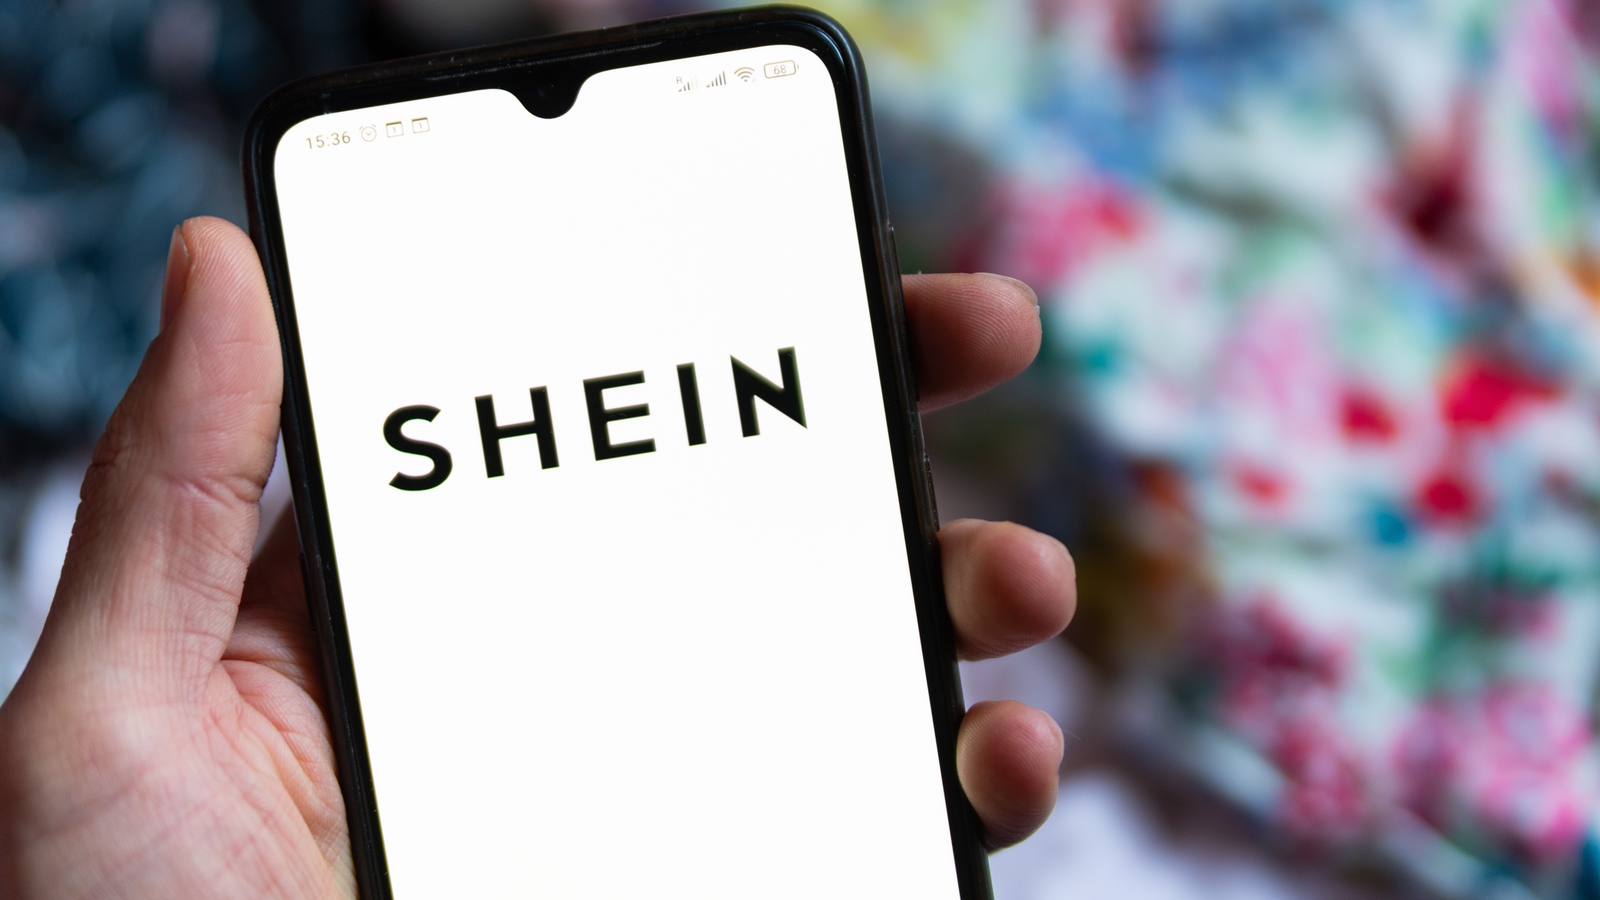 Shein files for U.S. IPO, looks to expand global reach